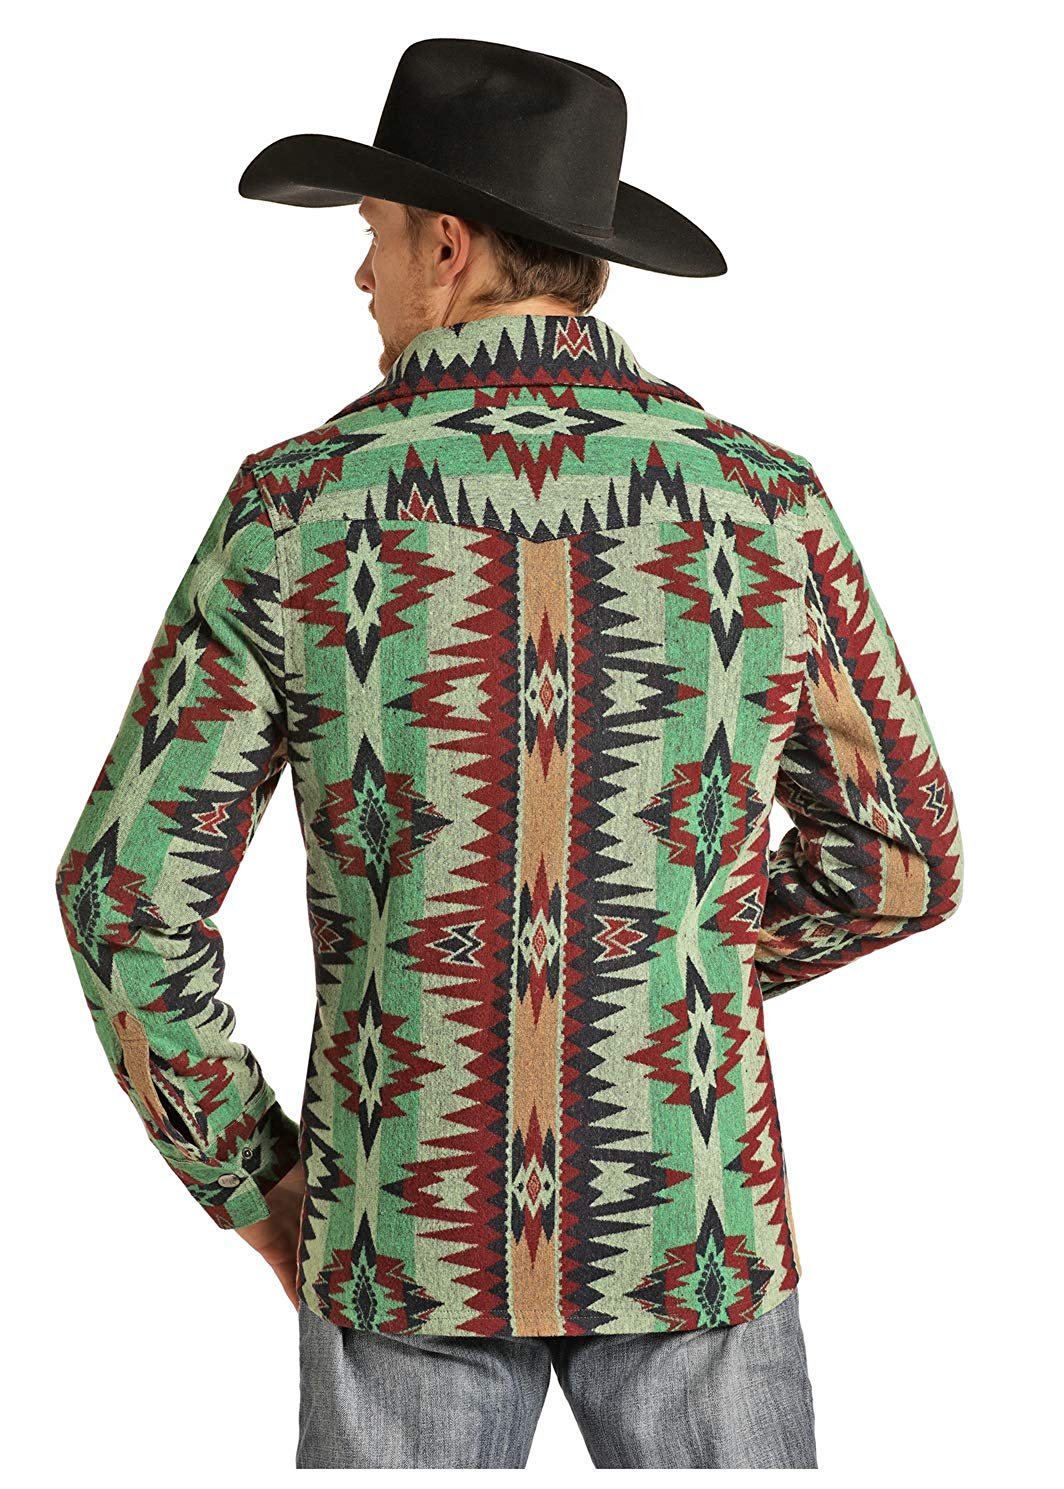 Powder River Outfitters Aztec Commander Jacket, Green | eBay